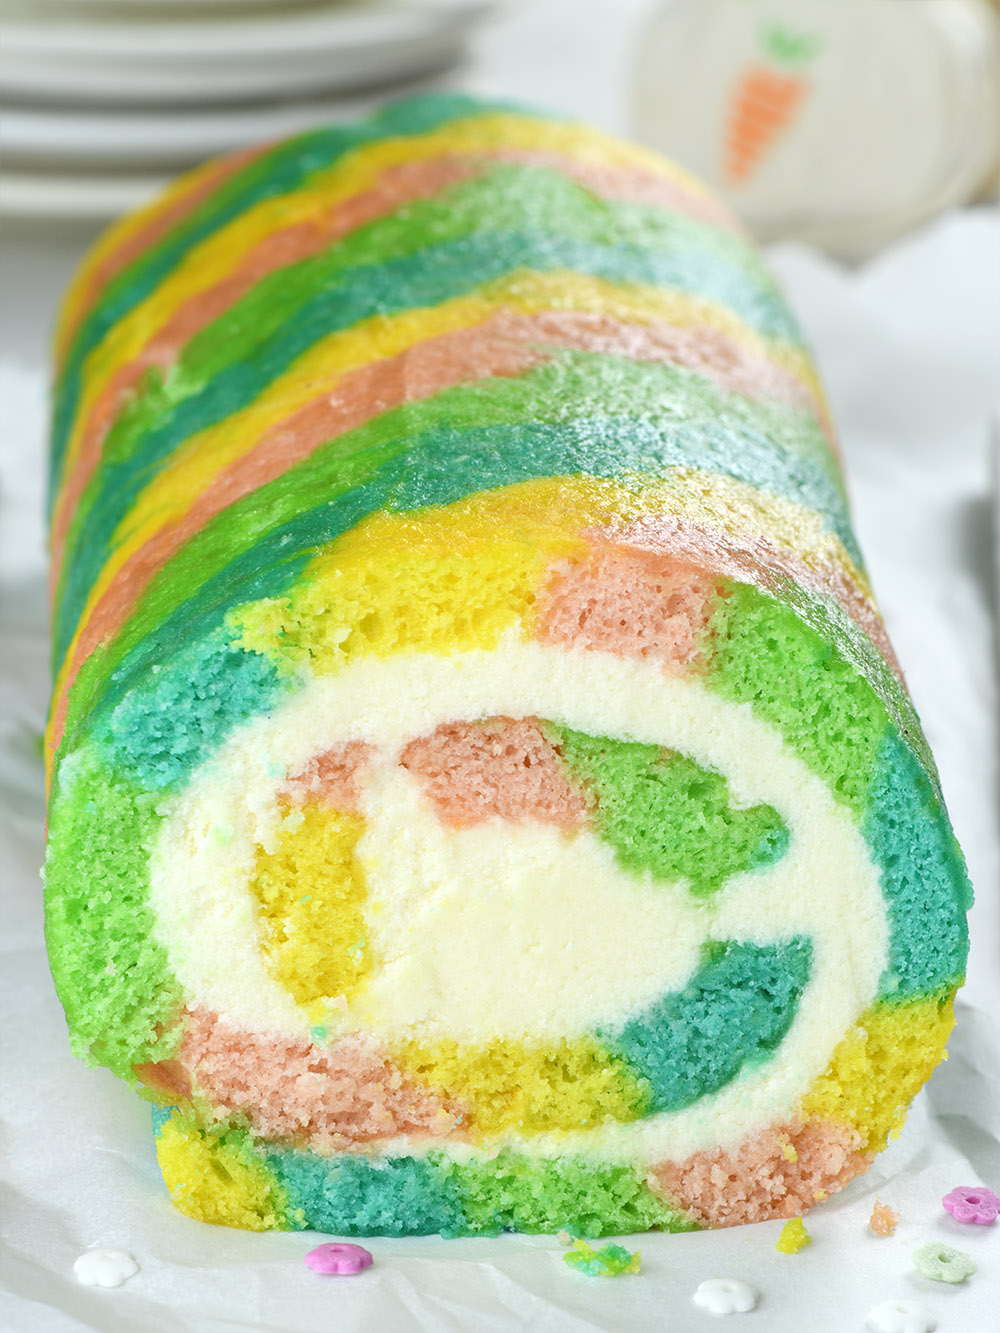 A whole piece of Easter roll cake.